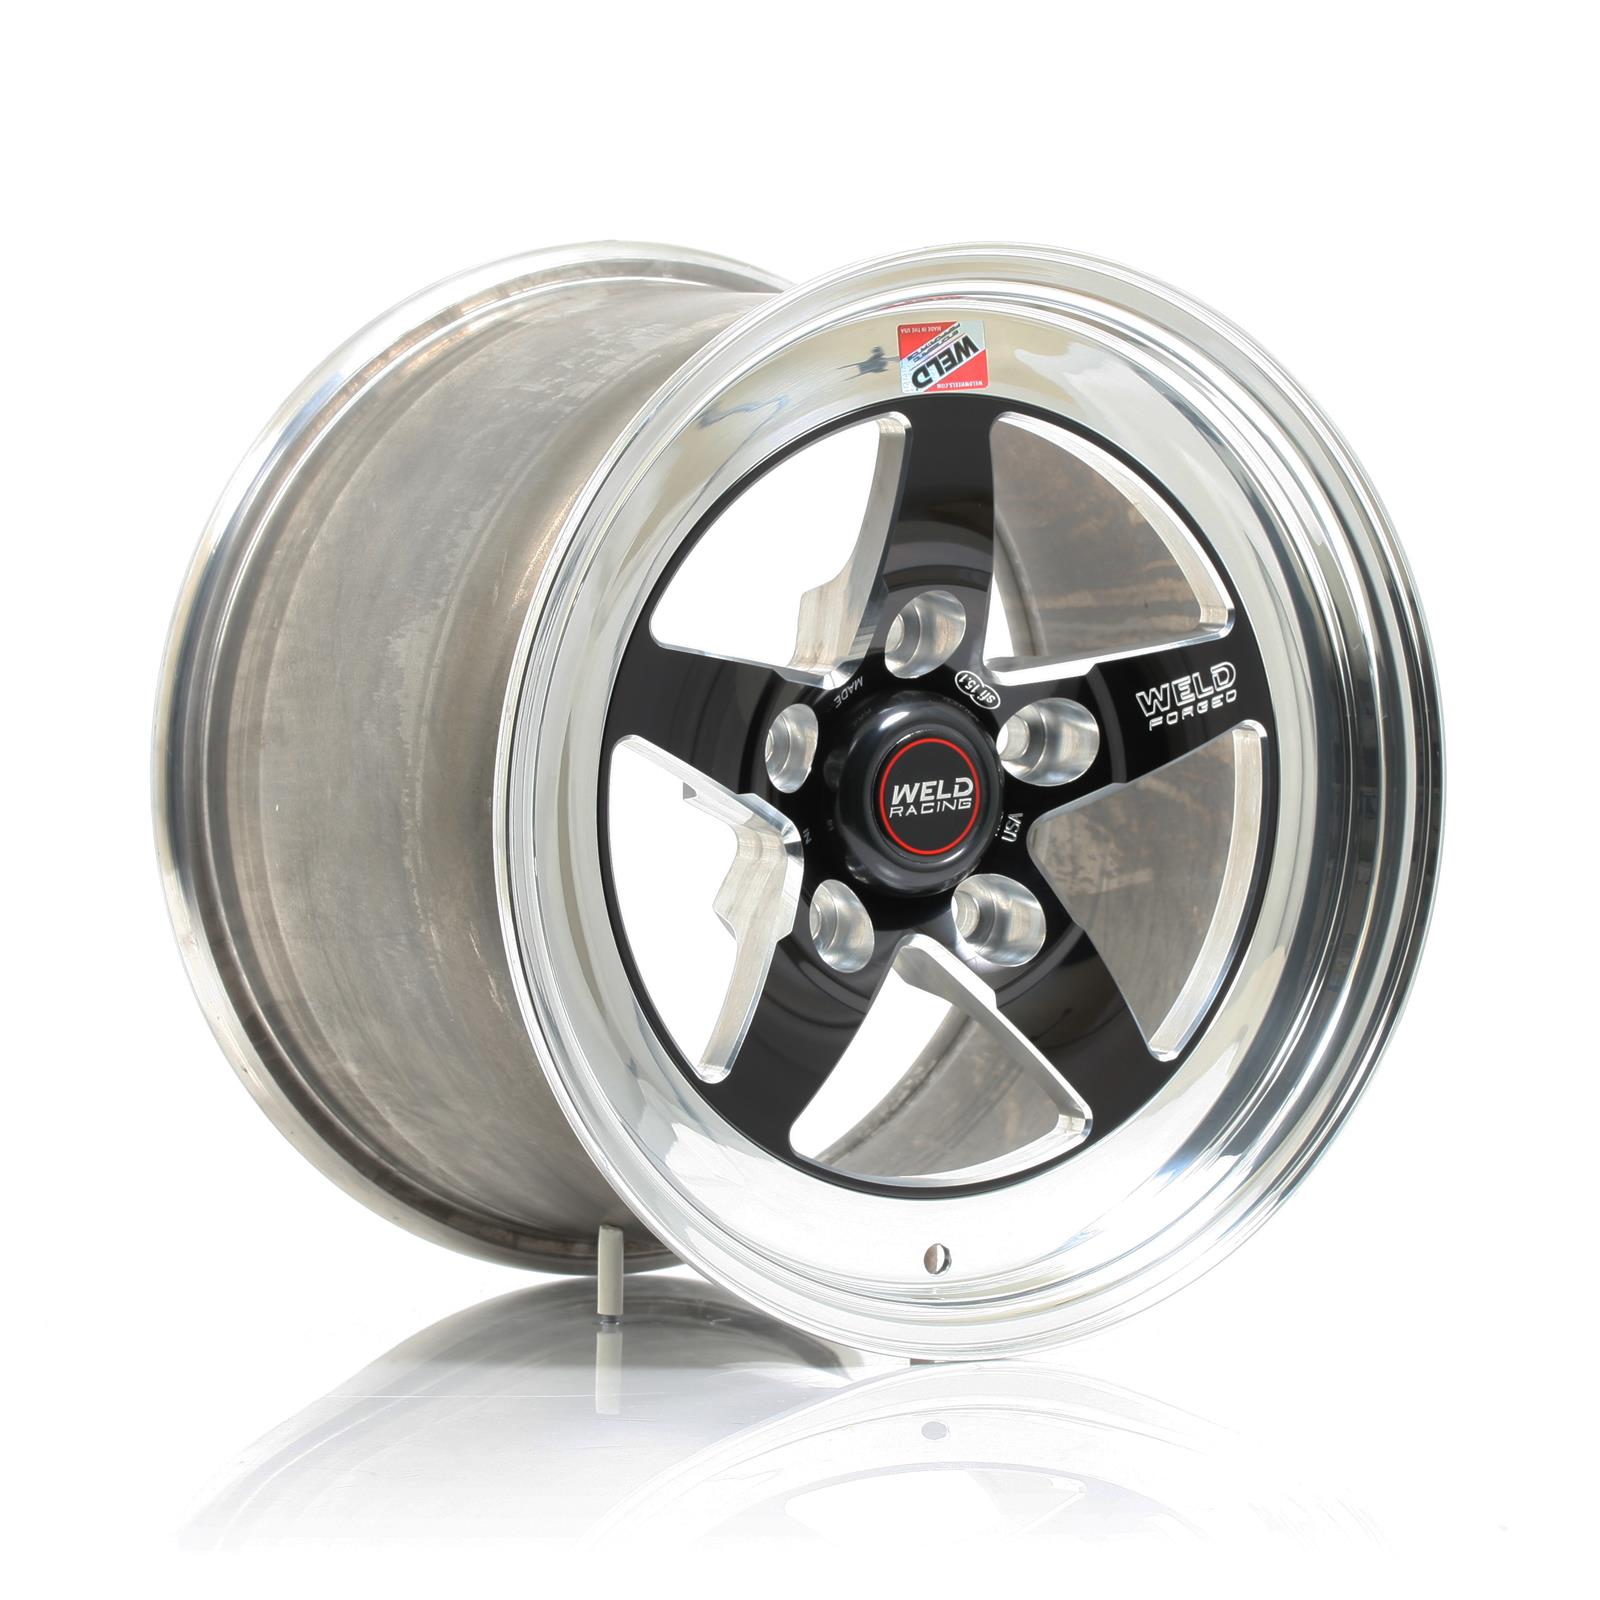 Weld Racing RT-S S71 Forged Aluminum Black Anodized Wheels - 17x11" w/7.8" Back Spacing